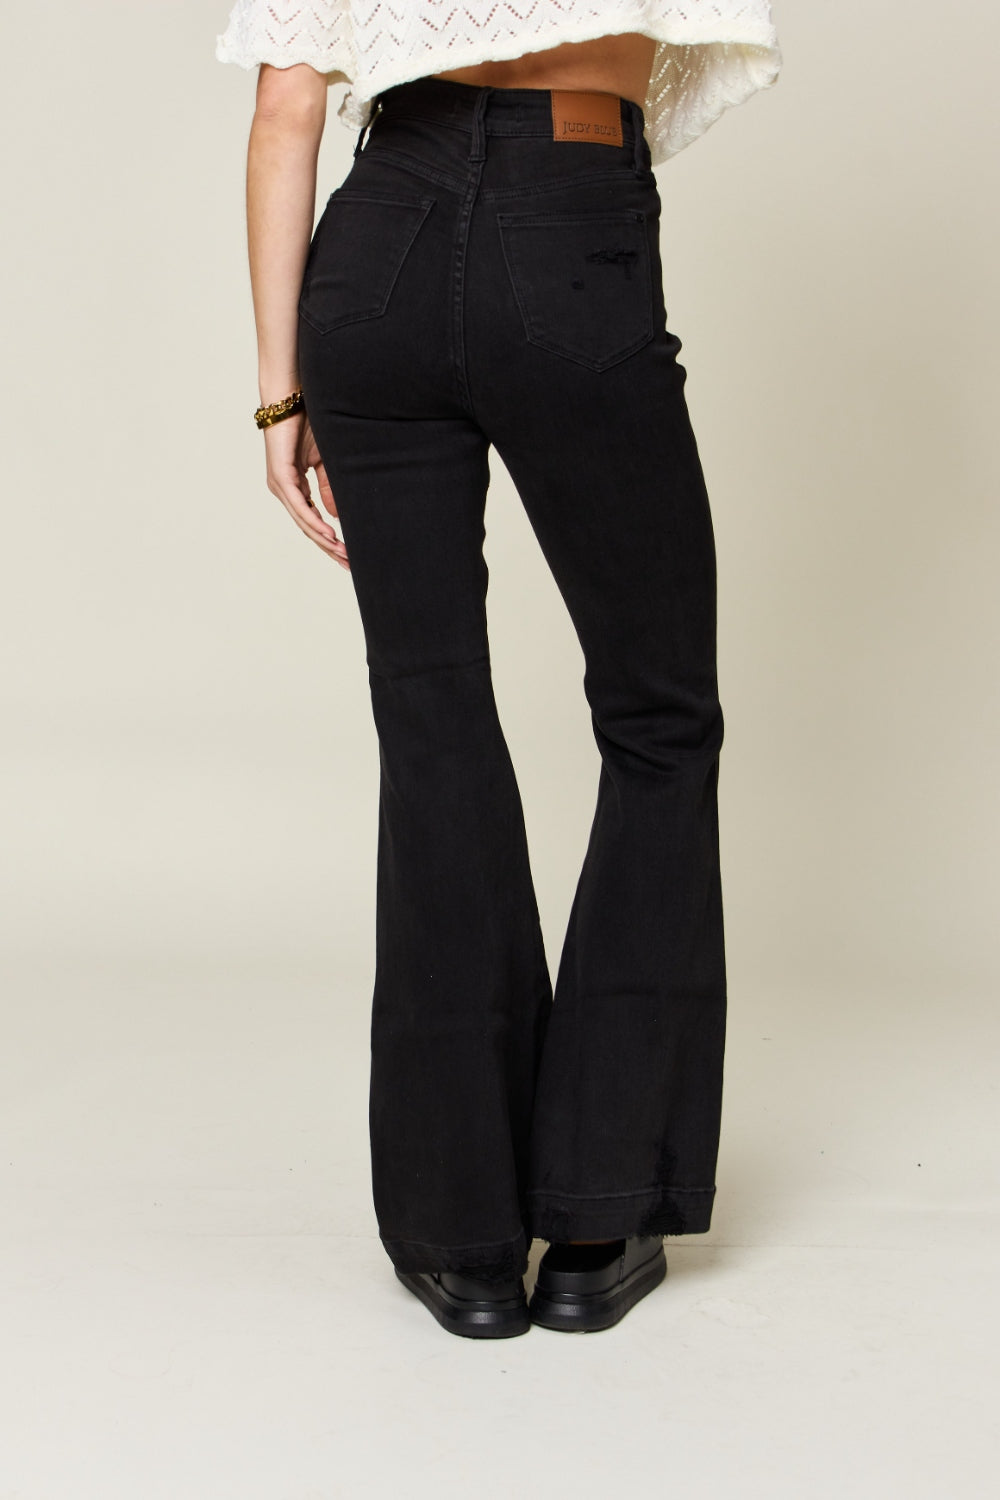 Women's Flare Jeans - Distressed Flare Jeans | Elegant Lioness